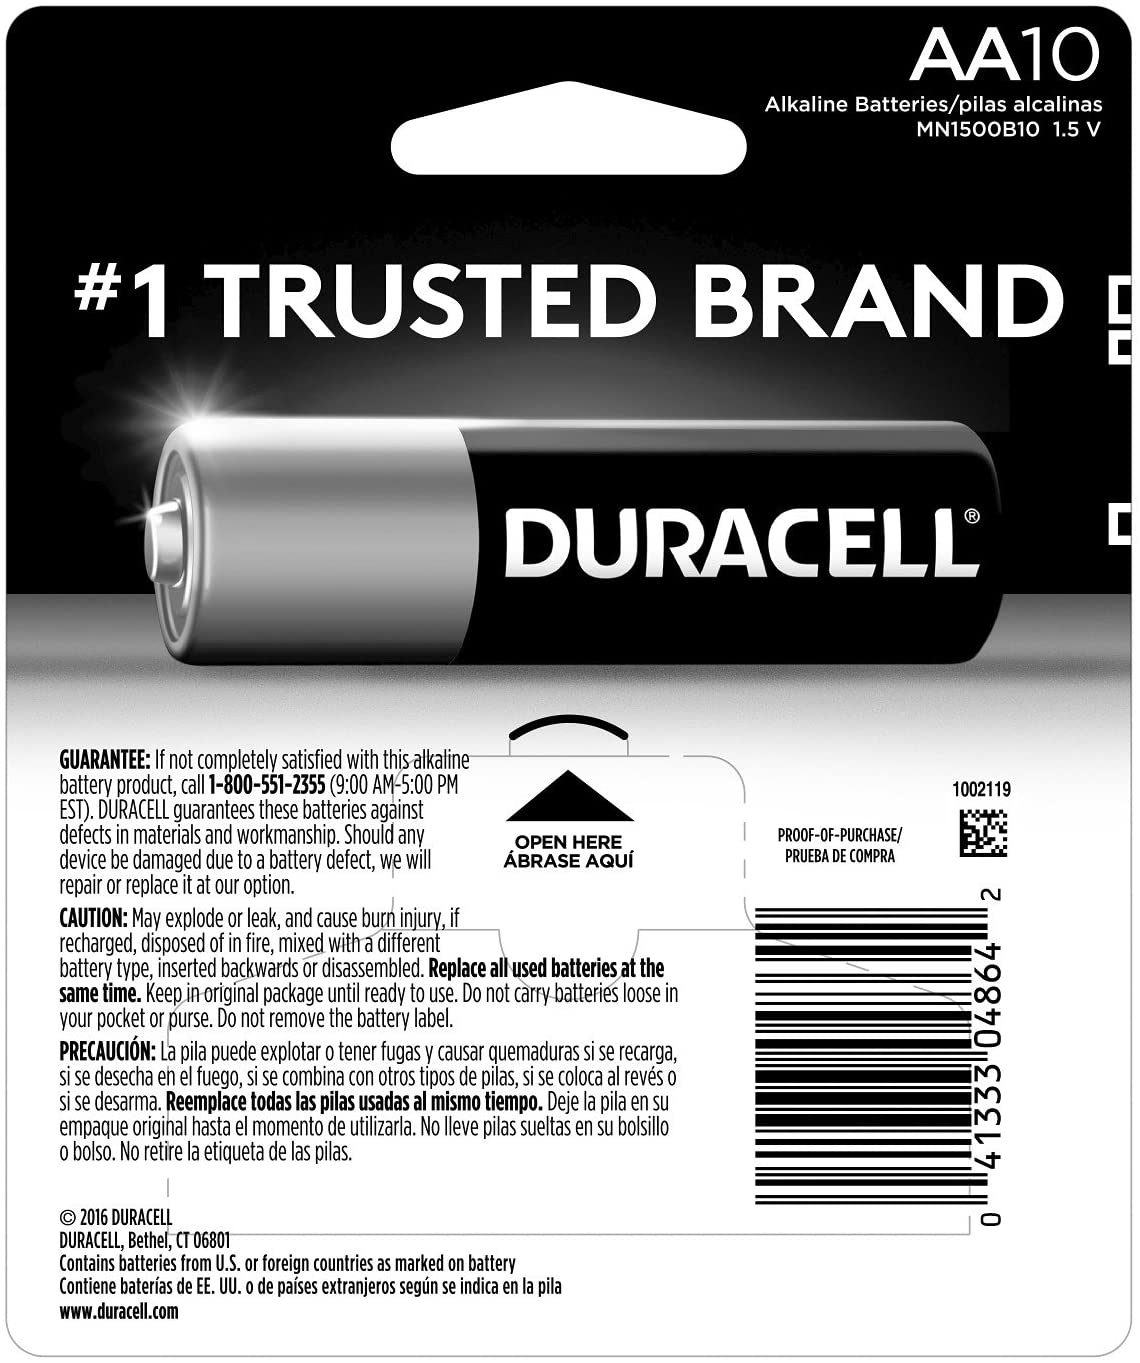 Duracell - CopperTop AA Alkaline Batteries - long lasting, all-purpose Double A battery for household and business